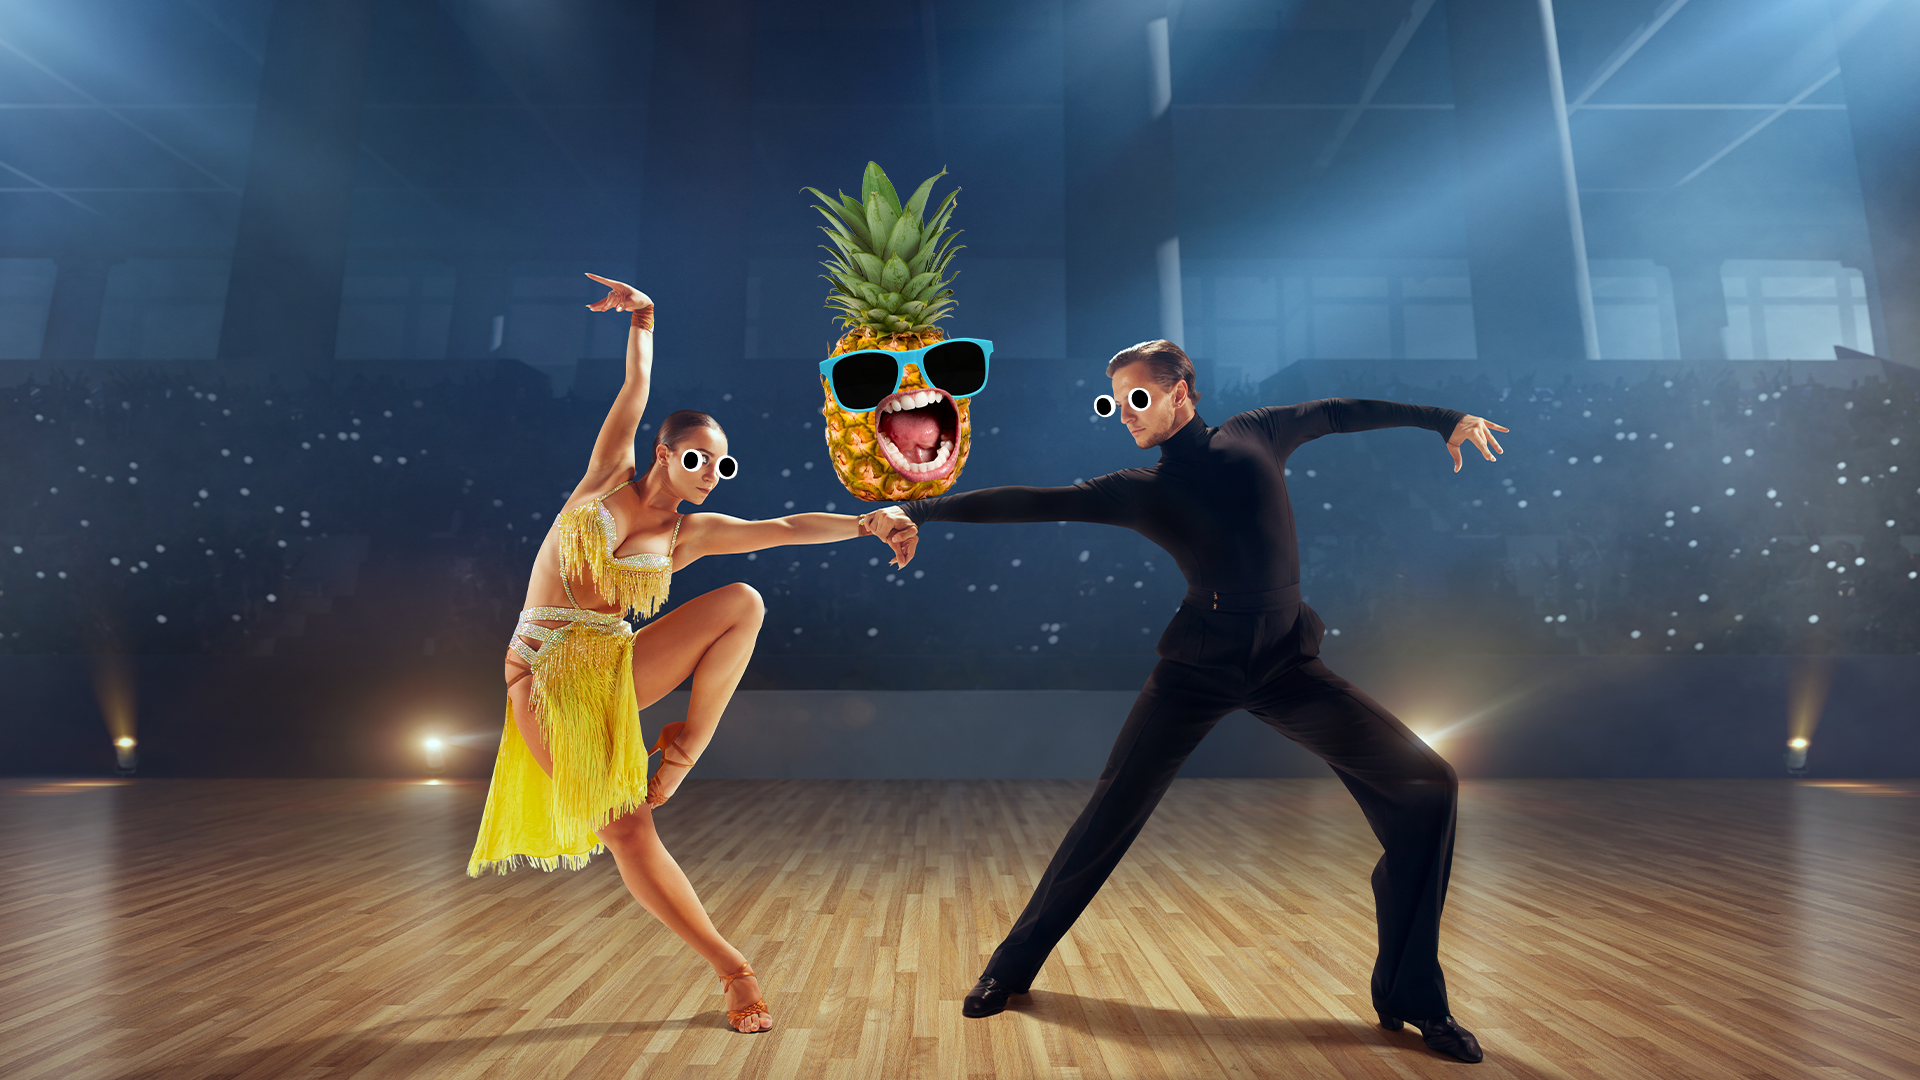 Ball dancing couple with screaming pineapple